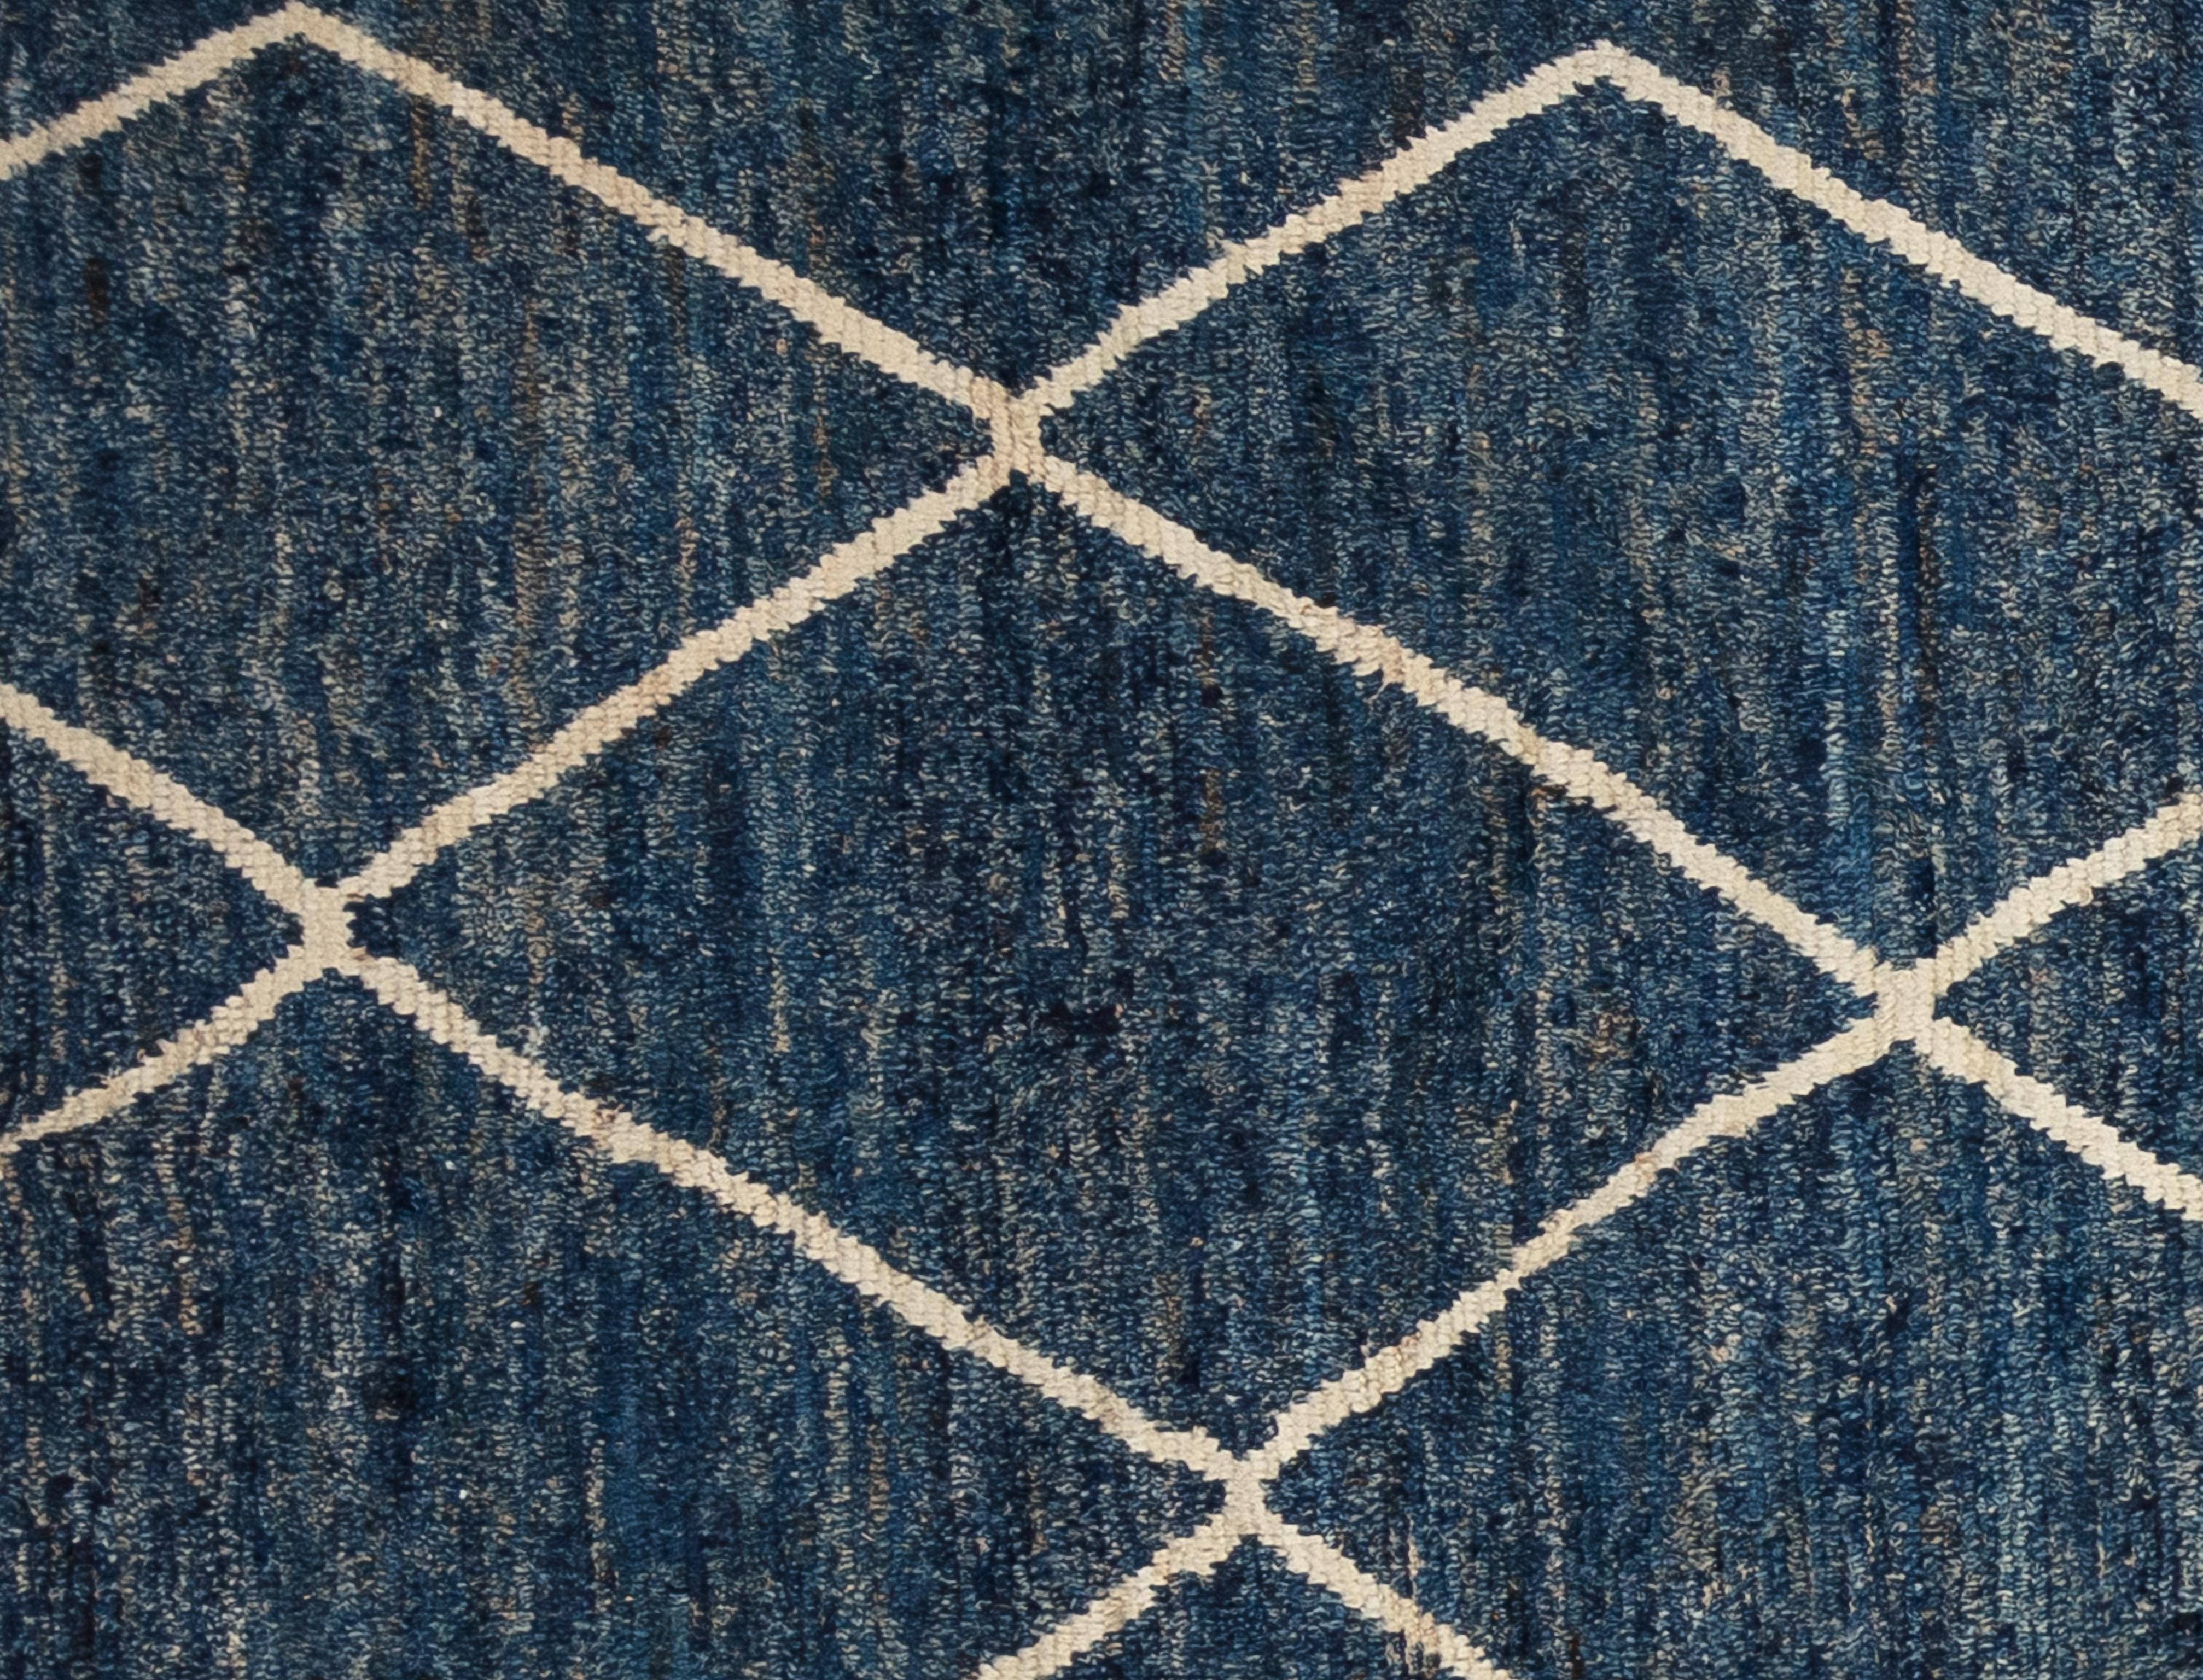 Handwoven with 100% handspun wool, in the subtropical woodlands of Pakistan; this beautiful naturally dyed Moroccan rug is truly one-of-a-kind. Moroccan rugs tend to be simple and are the perfect compliment for your décor. From minimalist modern to